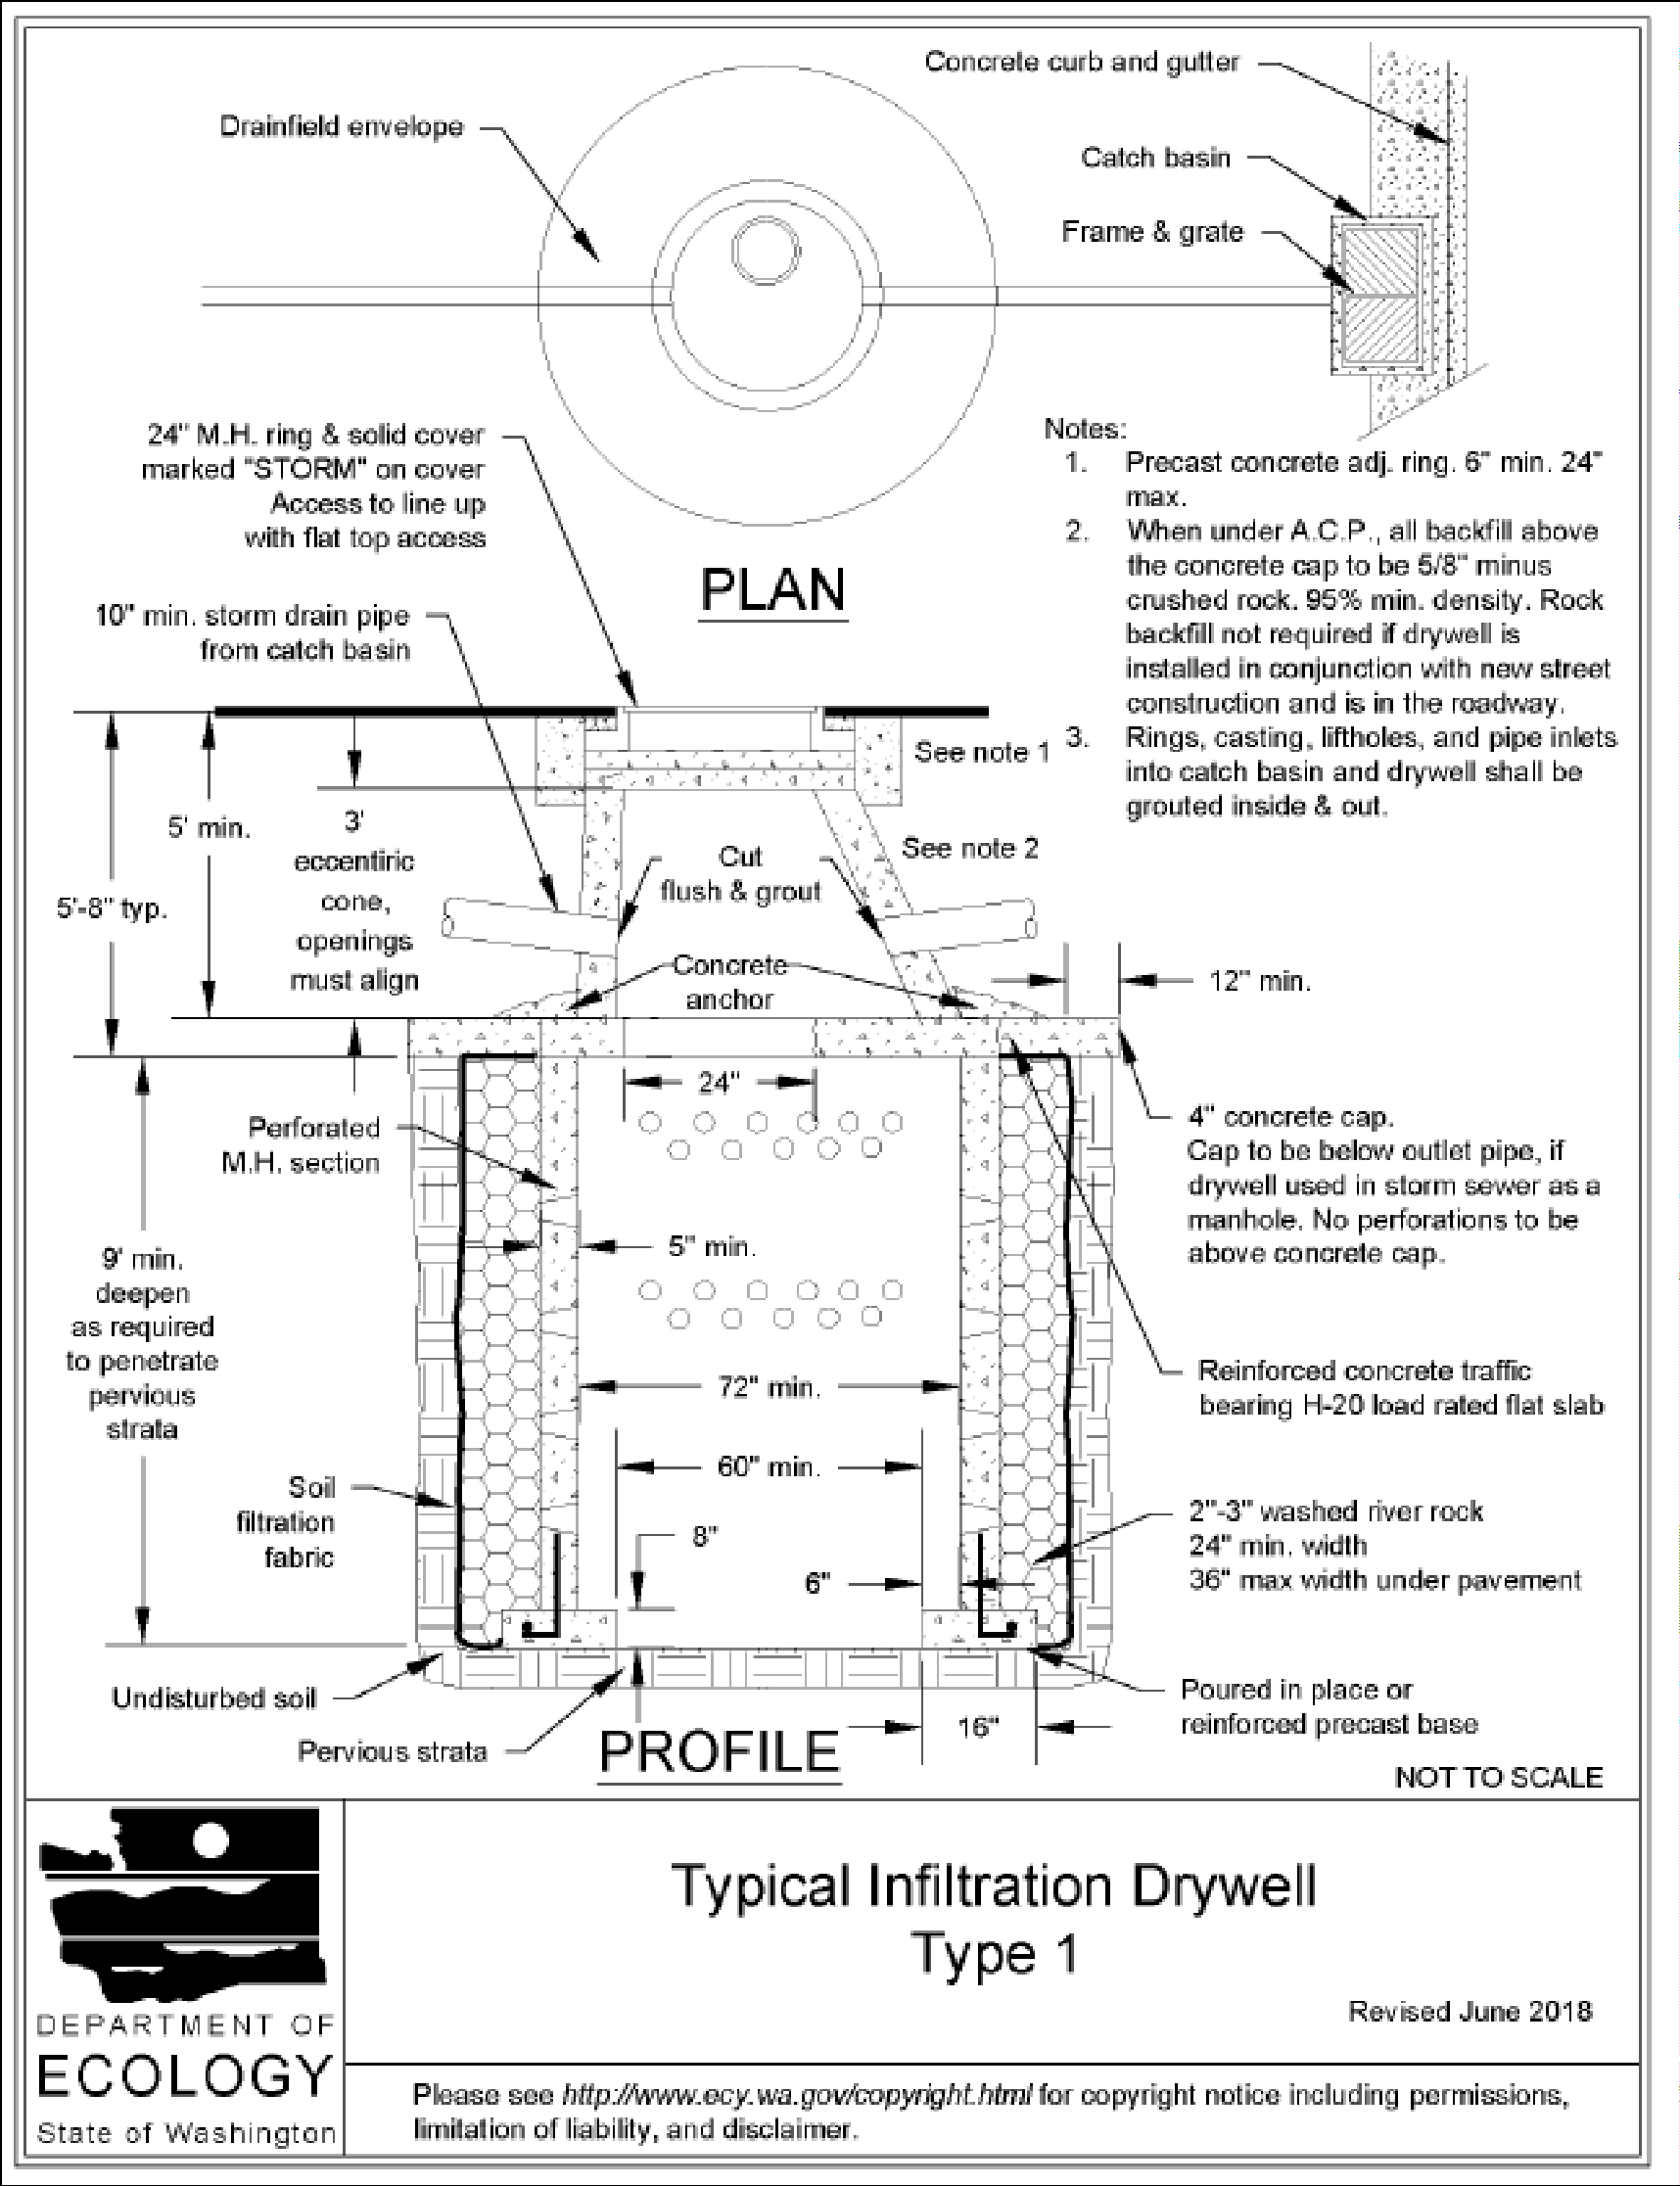 Figure 4-12 Typical Infiltration Drywell Type 1